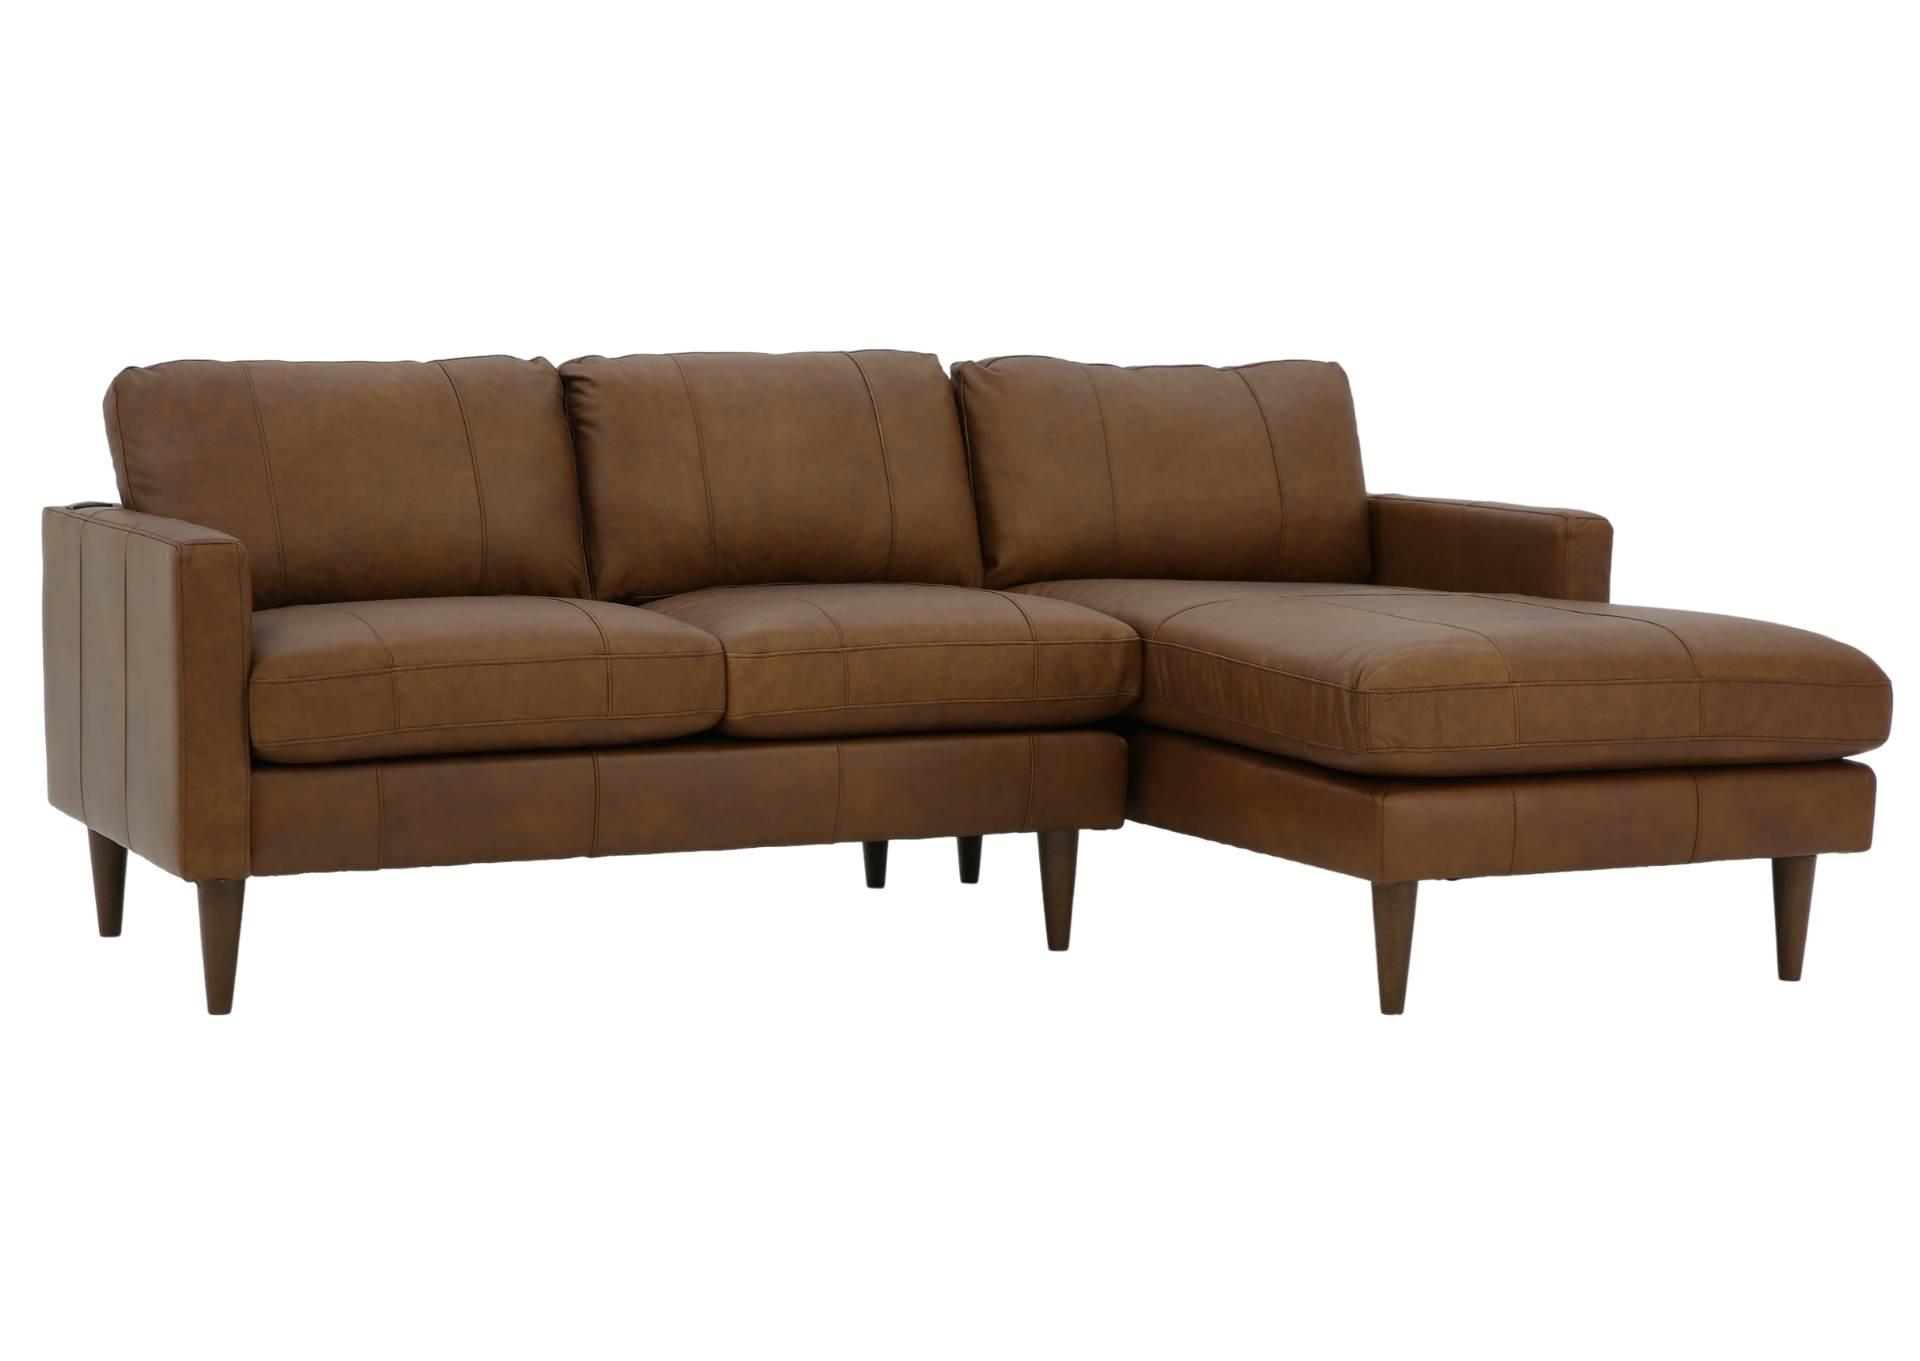 TRAFTON RUST LEATHER SECTIONAL,BEST CHAIRS INC